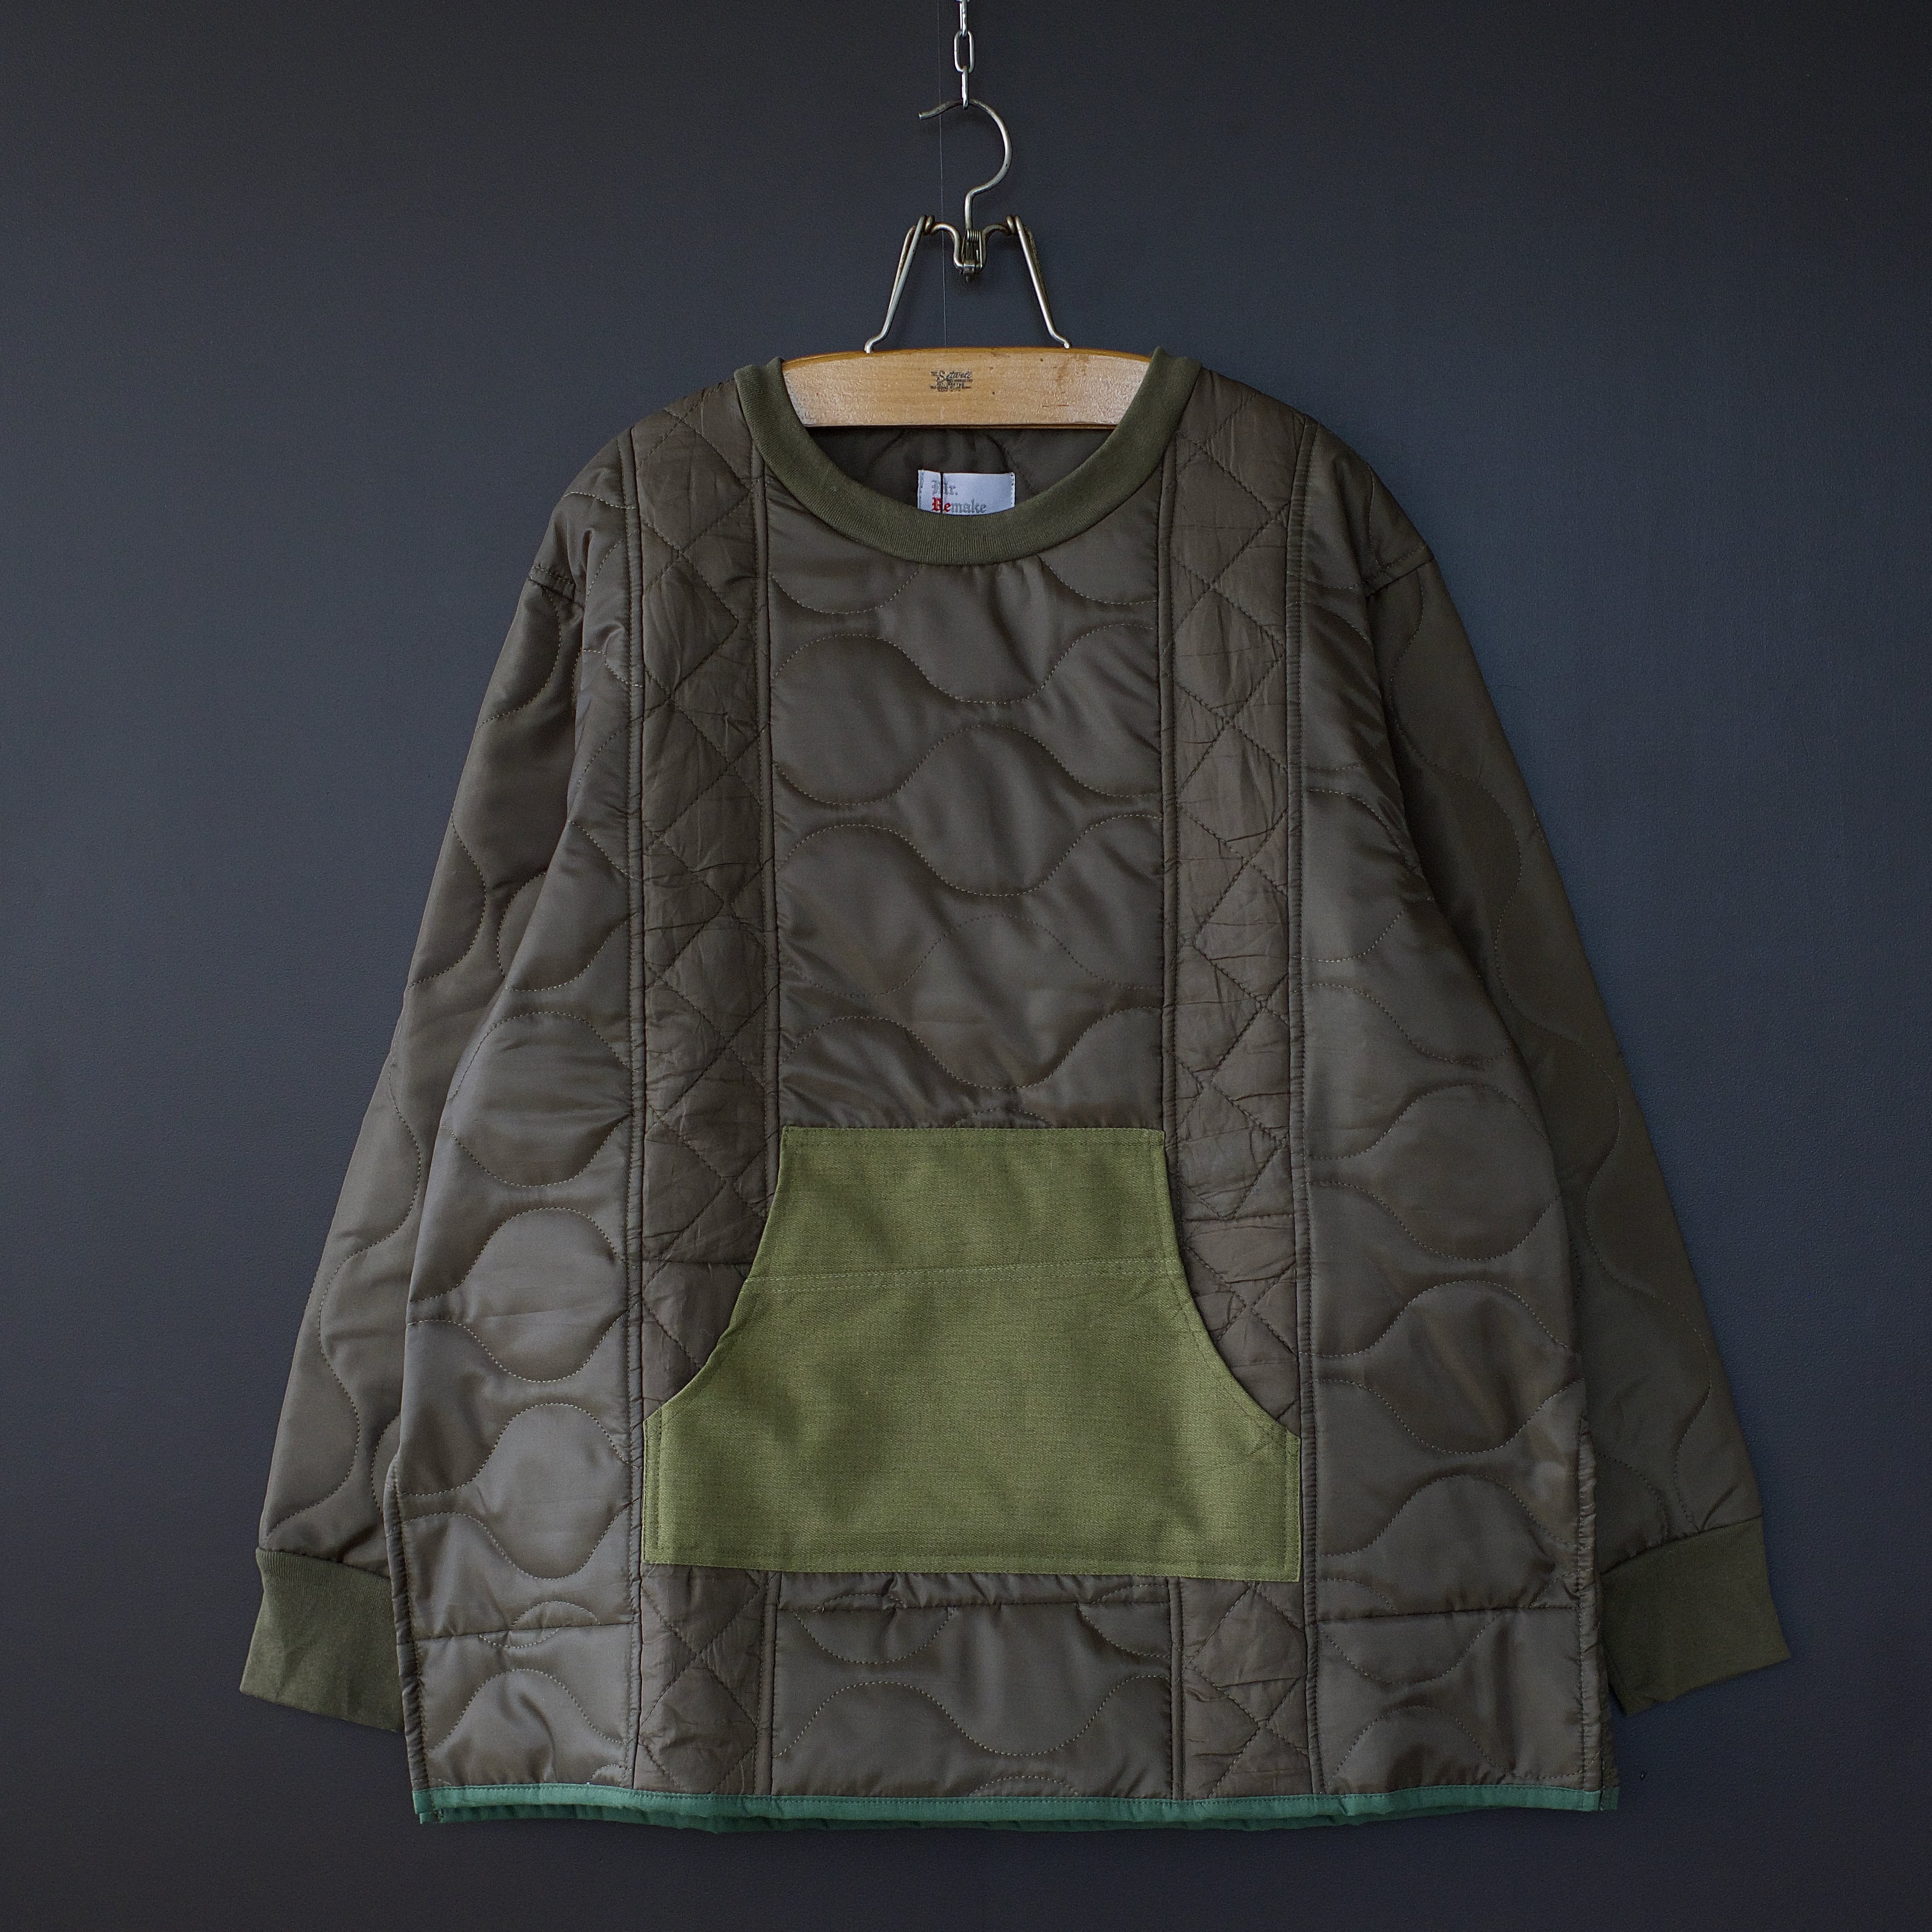 Mr. Remake Man.】used military quilt remake crew ① dros dro